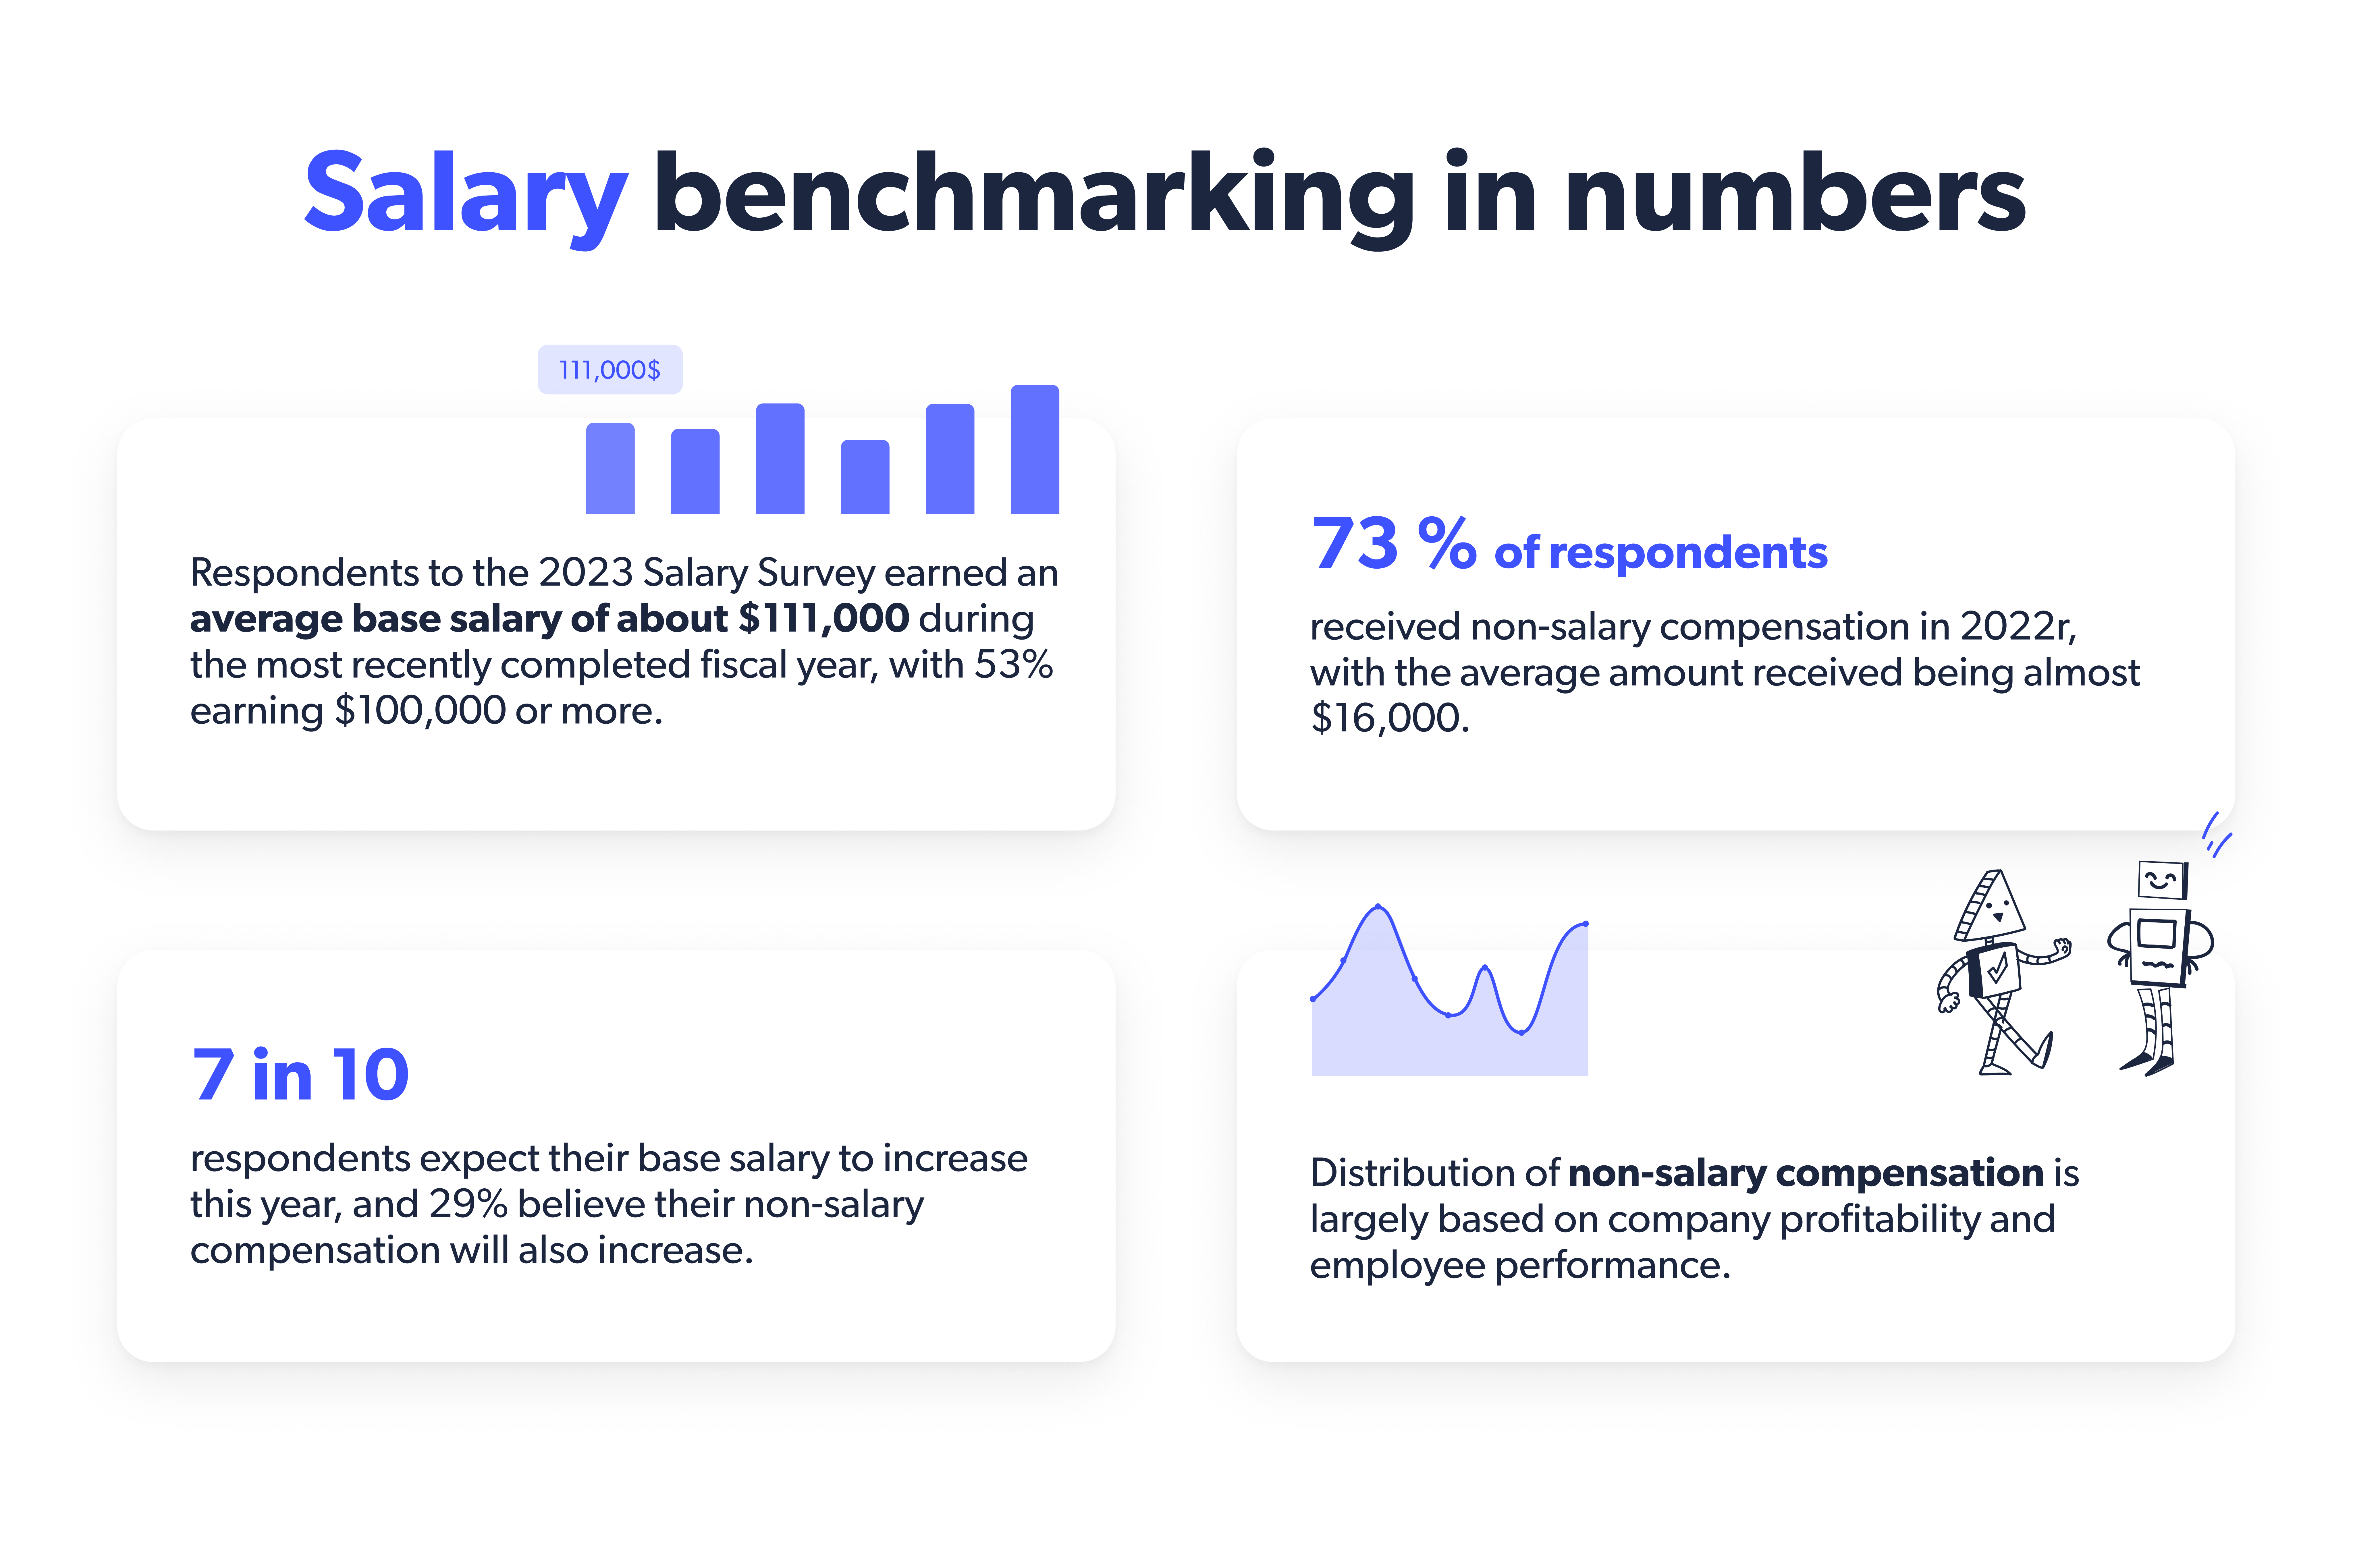 Salary benchmarking in numbers